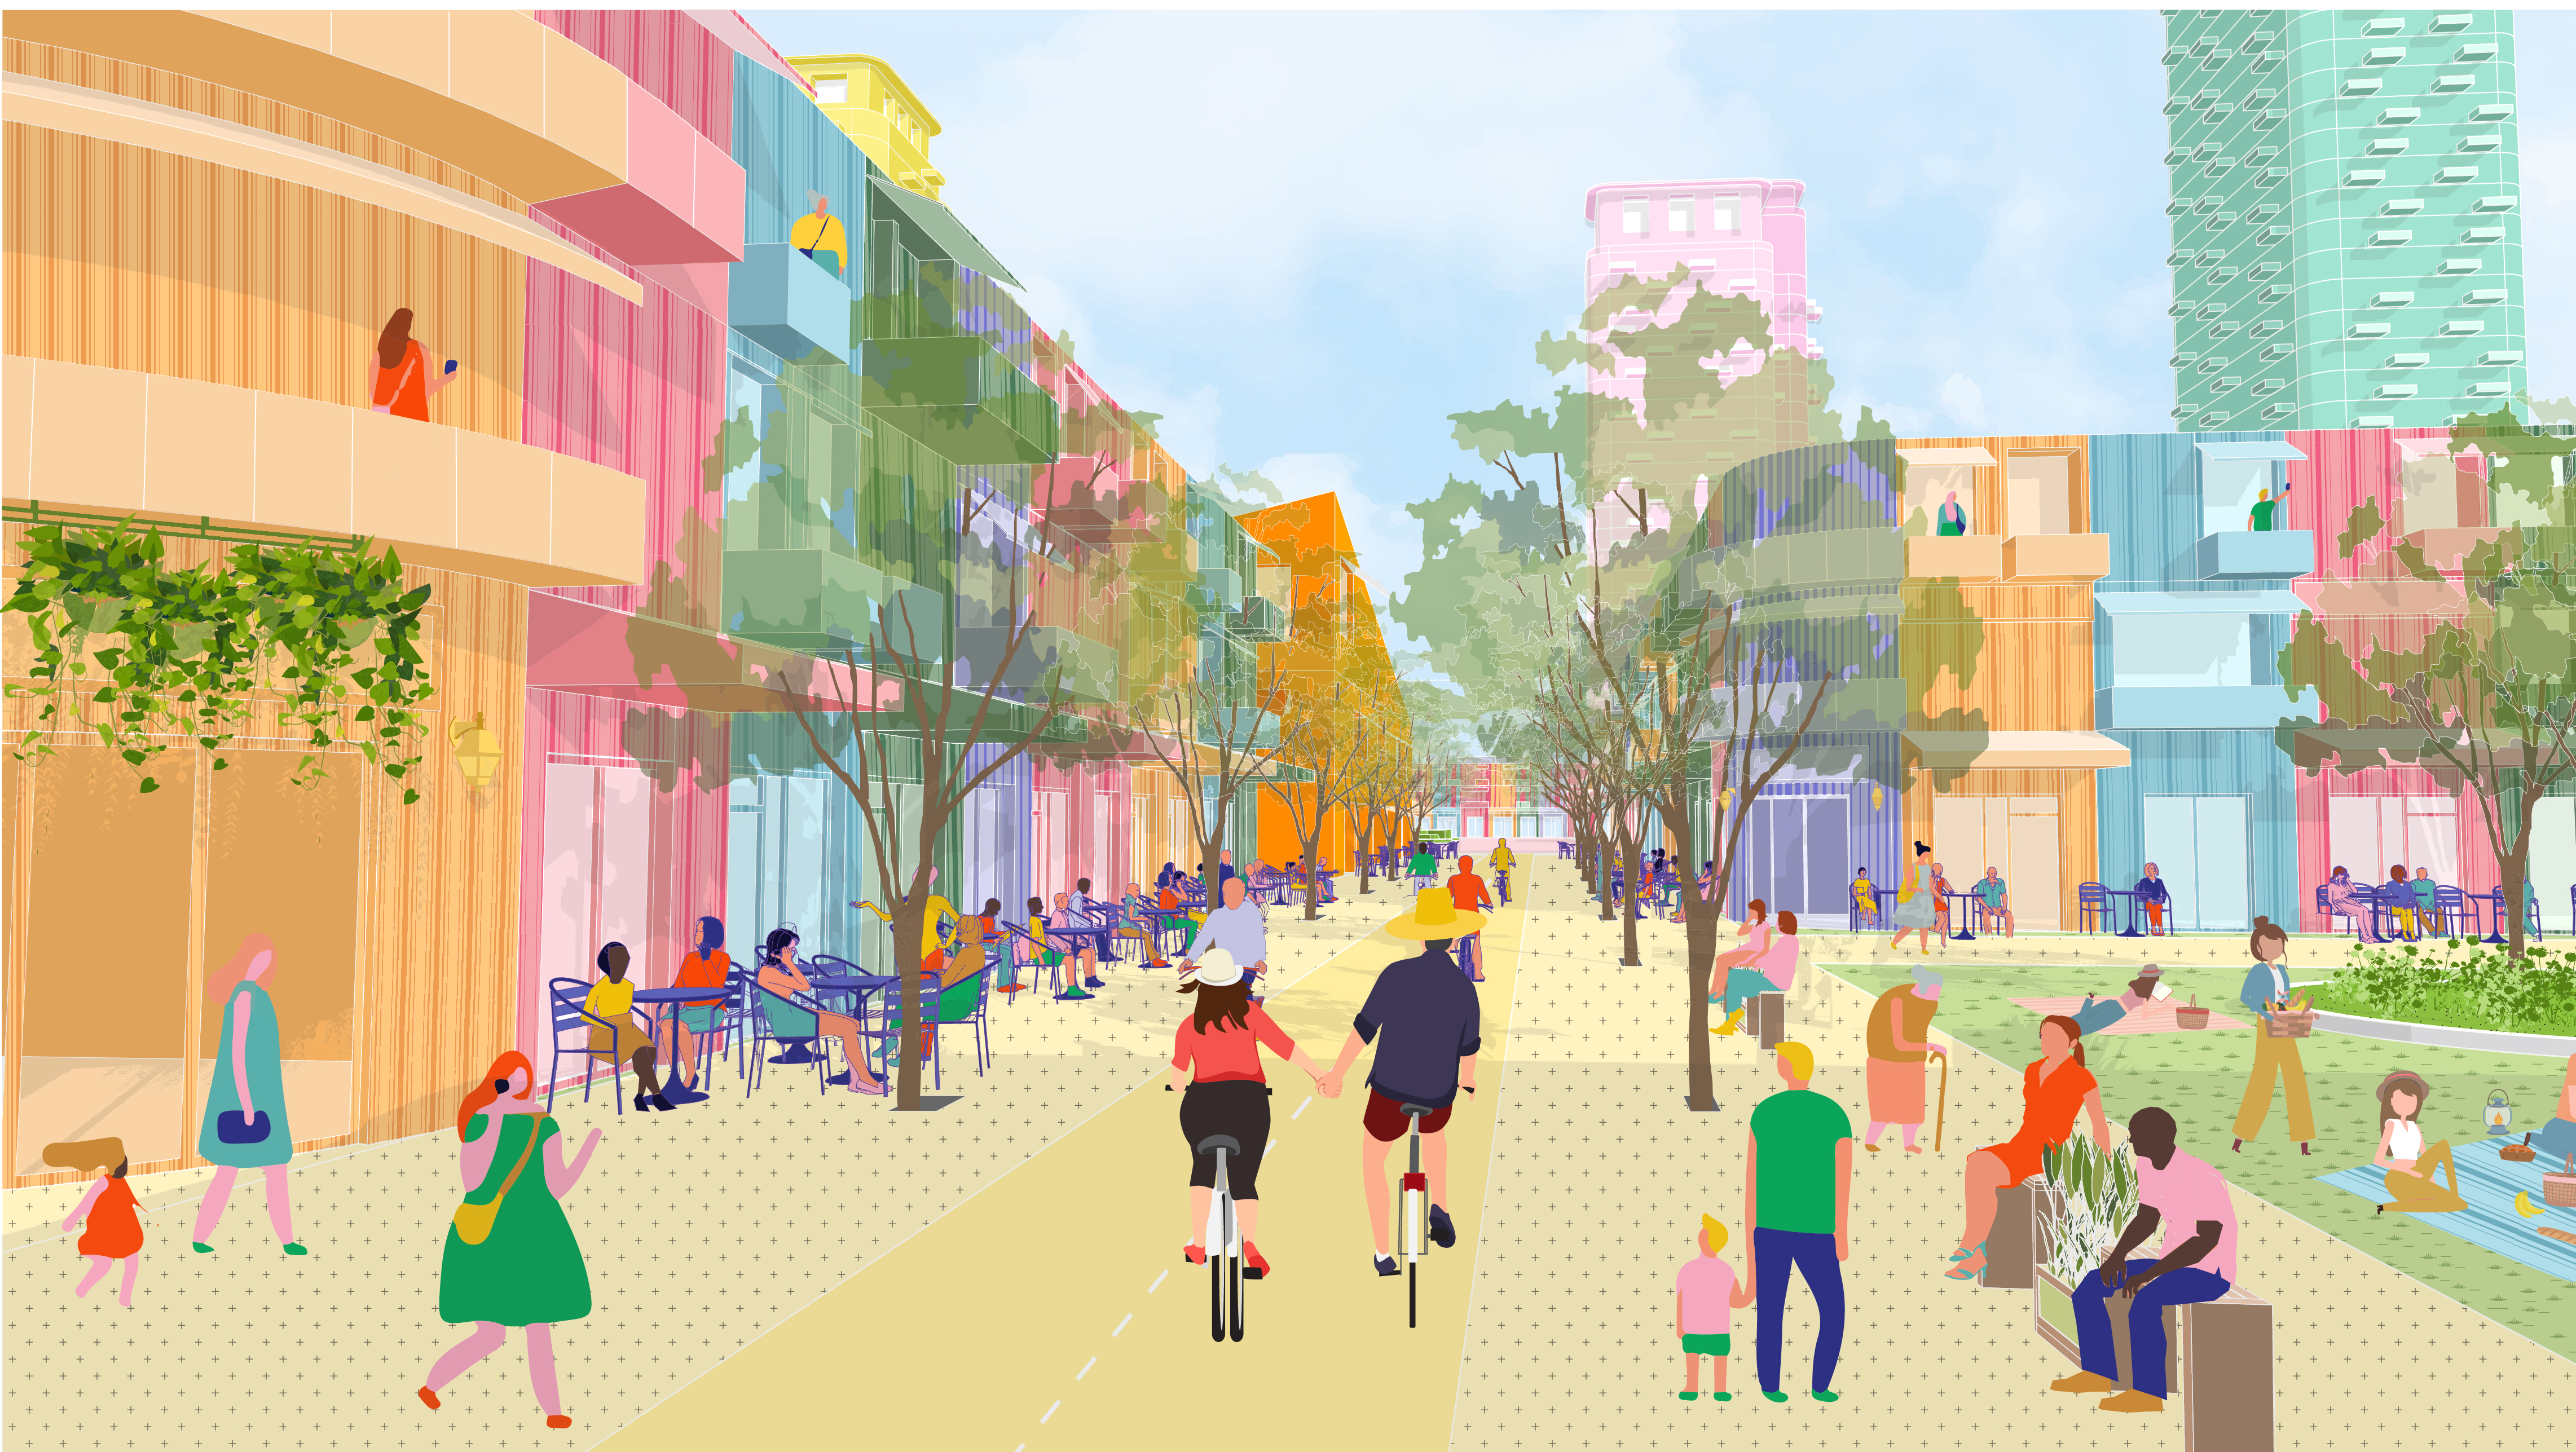 Awards Scaling Down: Shifting to Transit-Oriented Communities at Human Scale and Human Speed